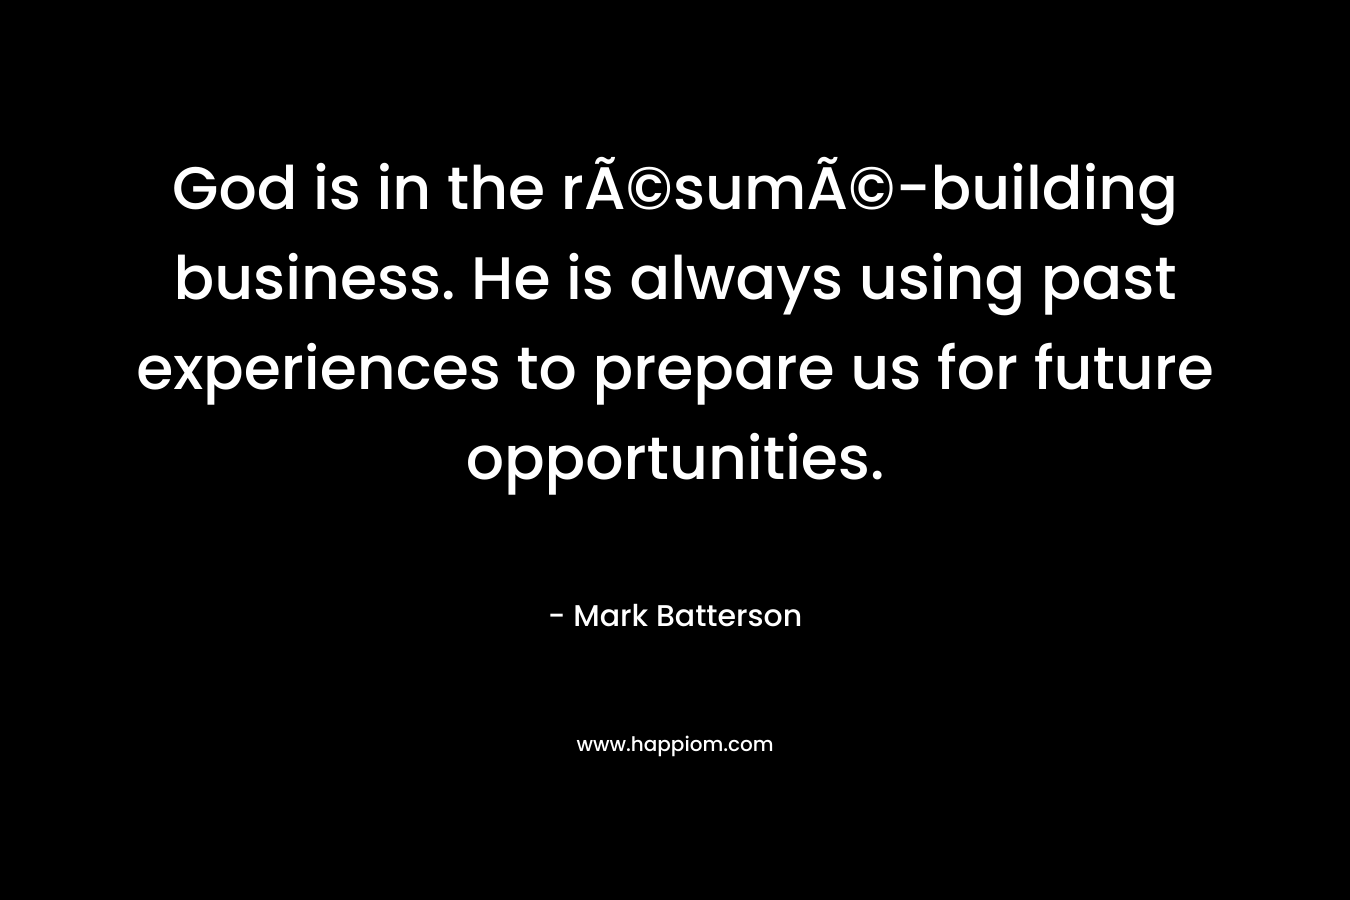 God is in the rÃ©sumÃ©-building business. He is always using past experiences to prepare us for future opportunities. – Mark Batterson